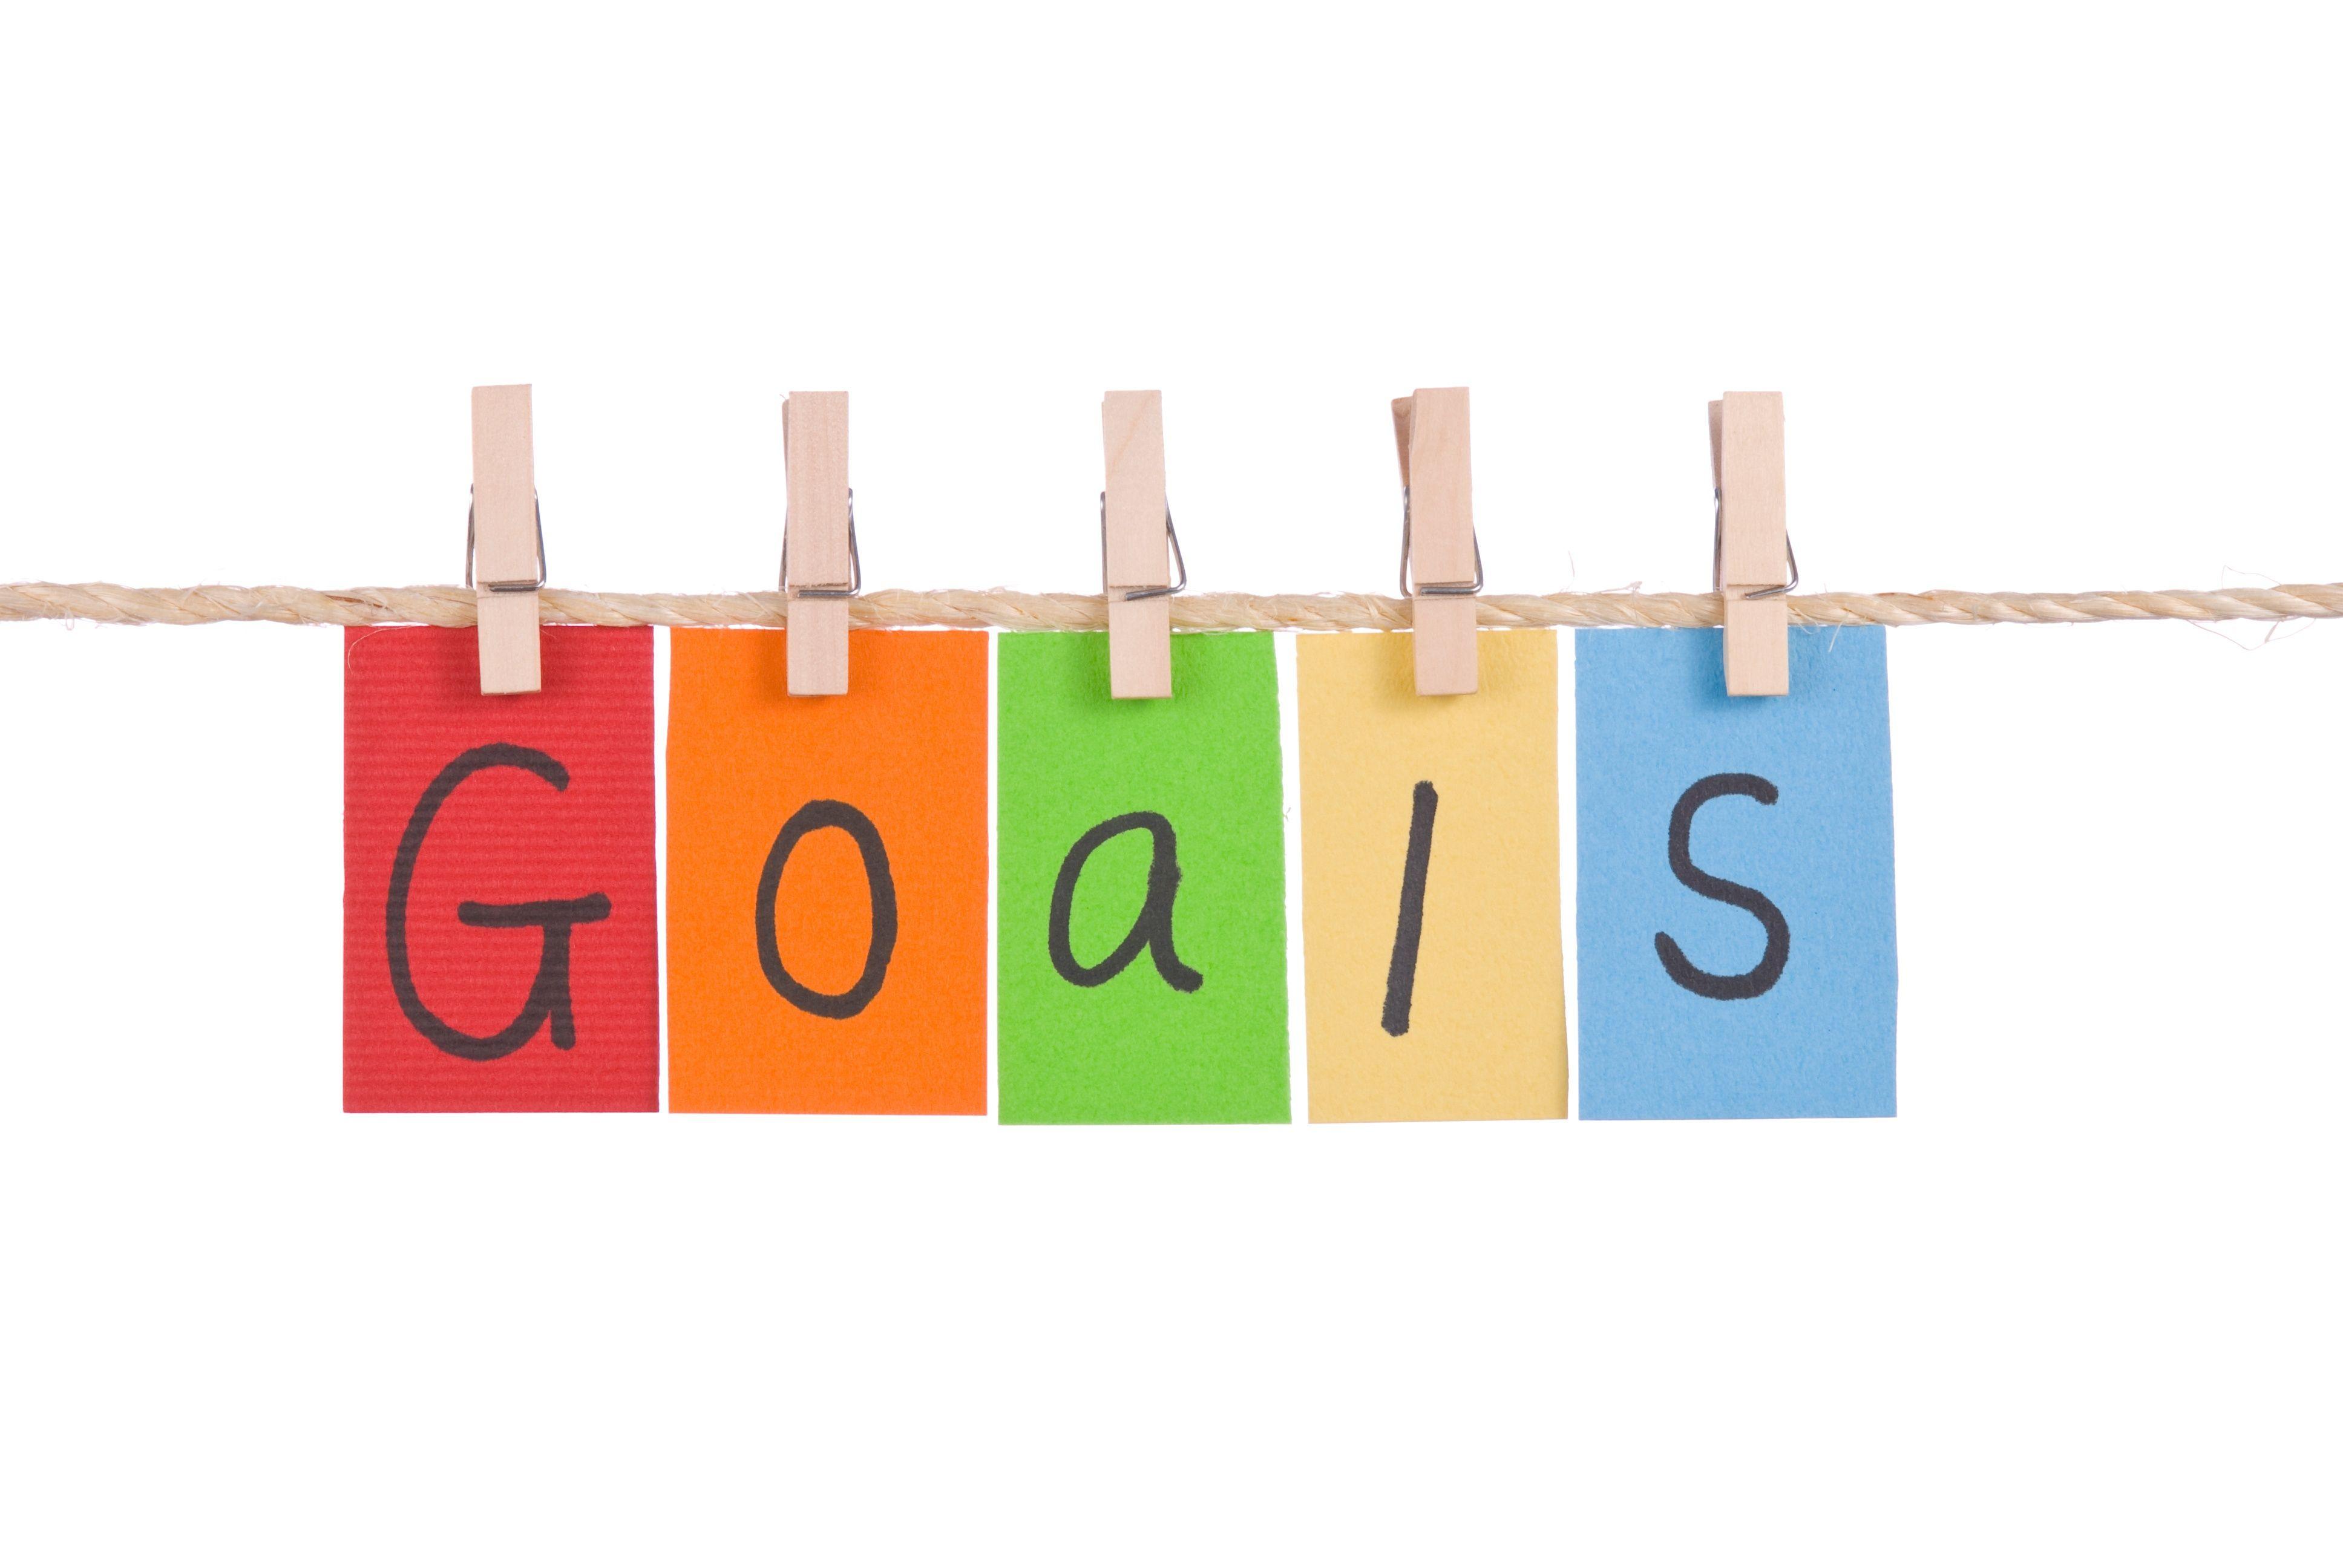 Be sure to set goals wallpaper and image, picture